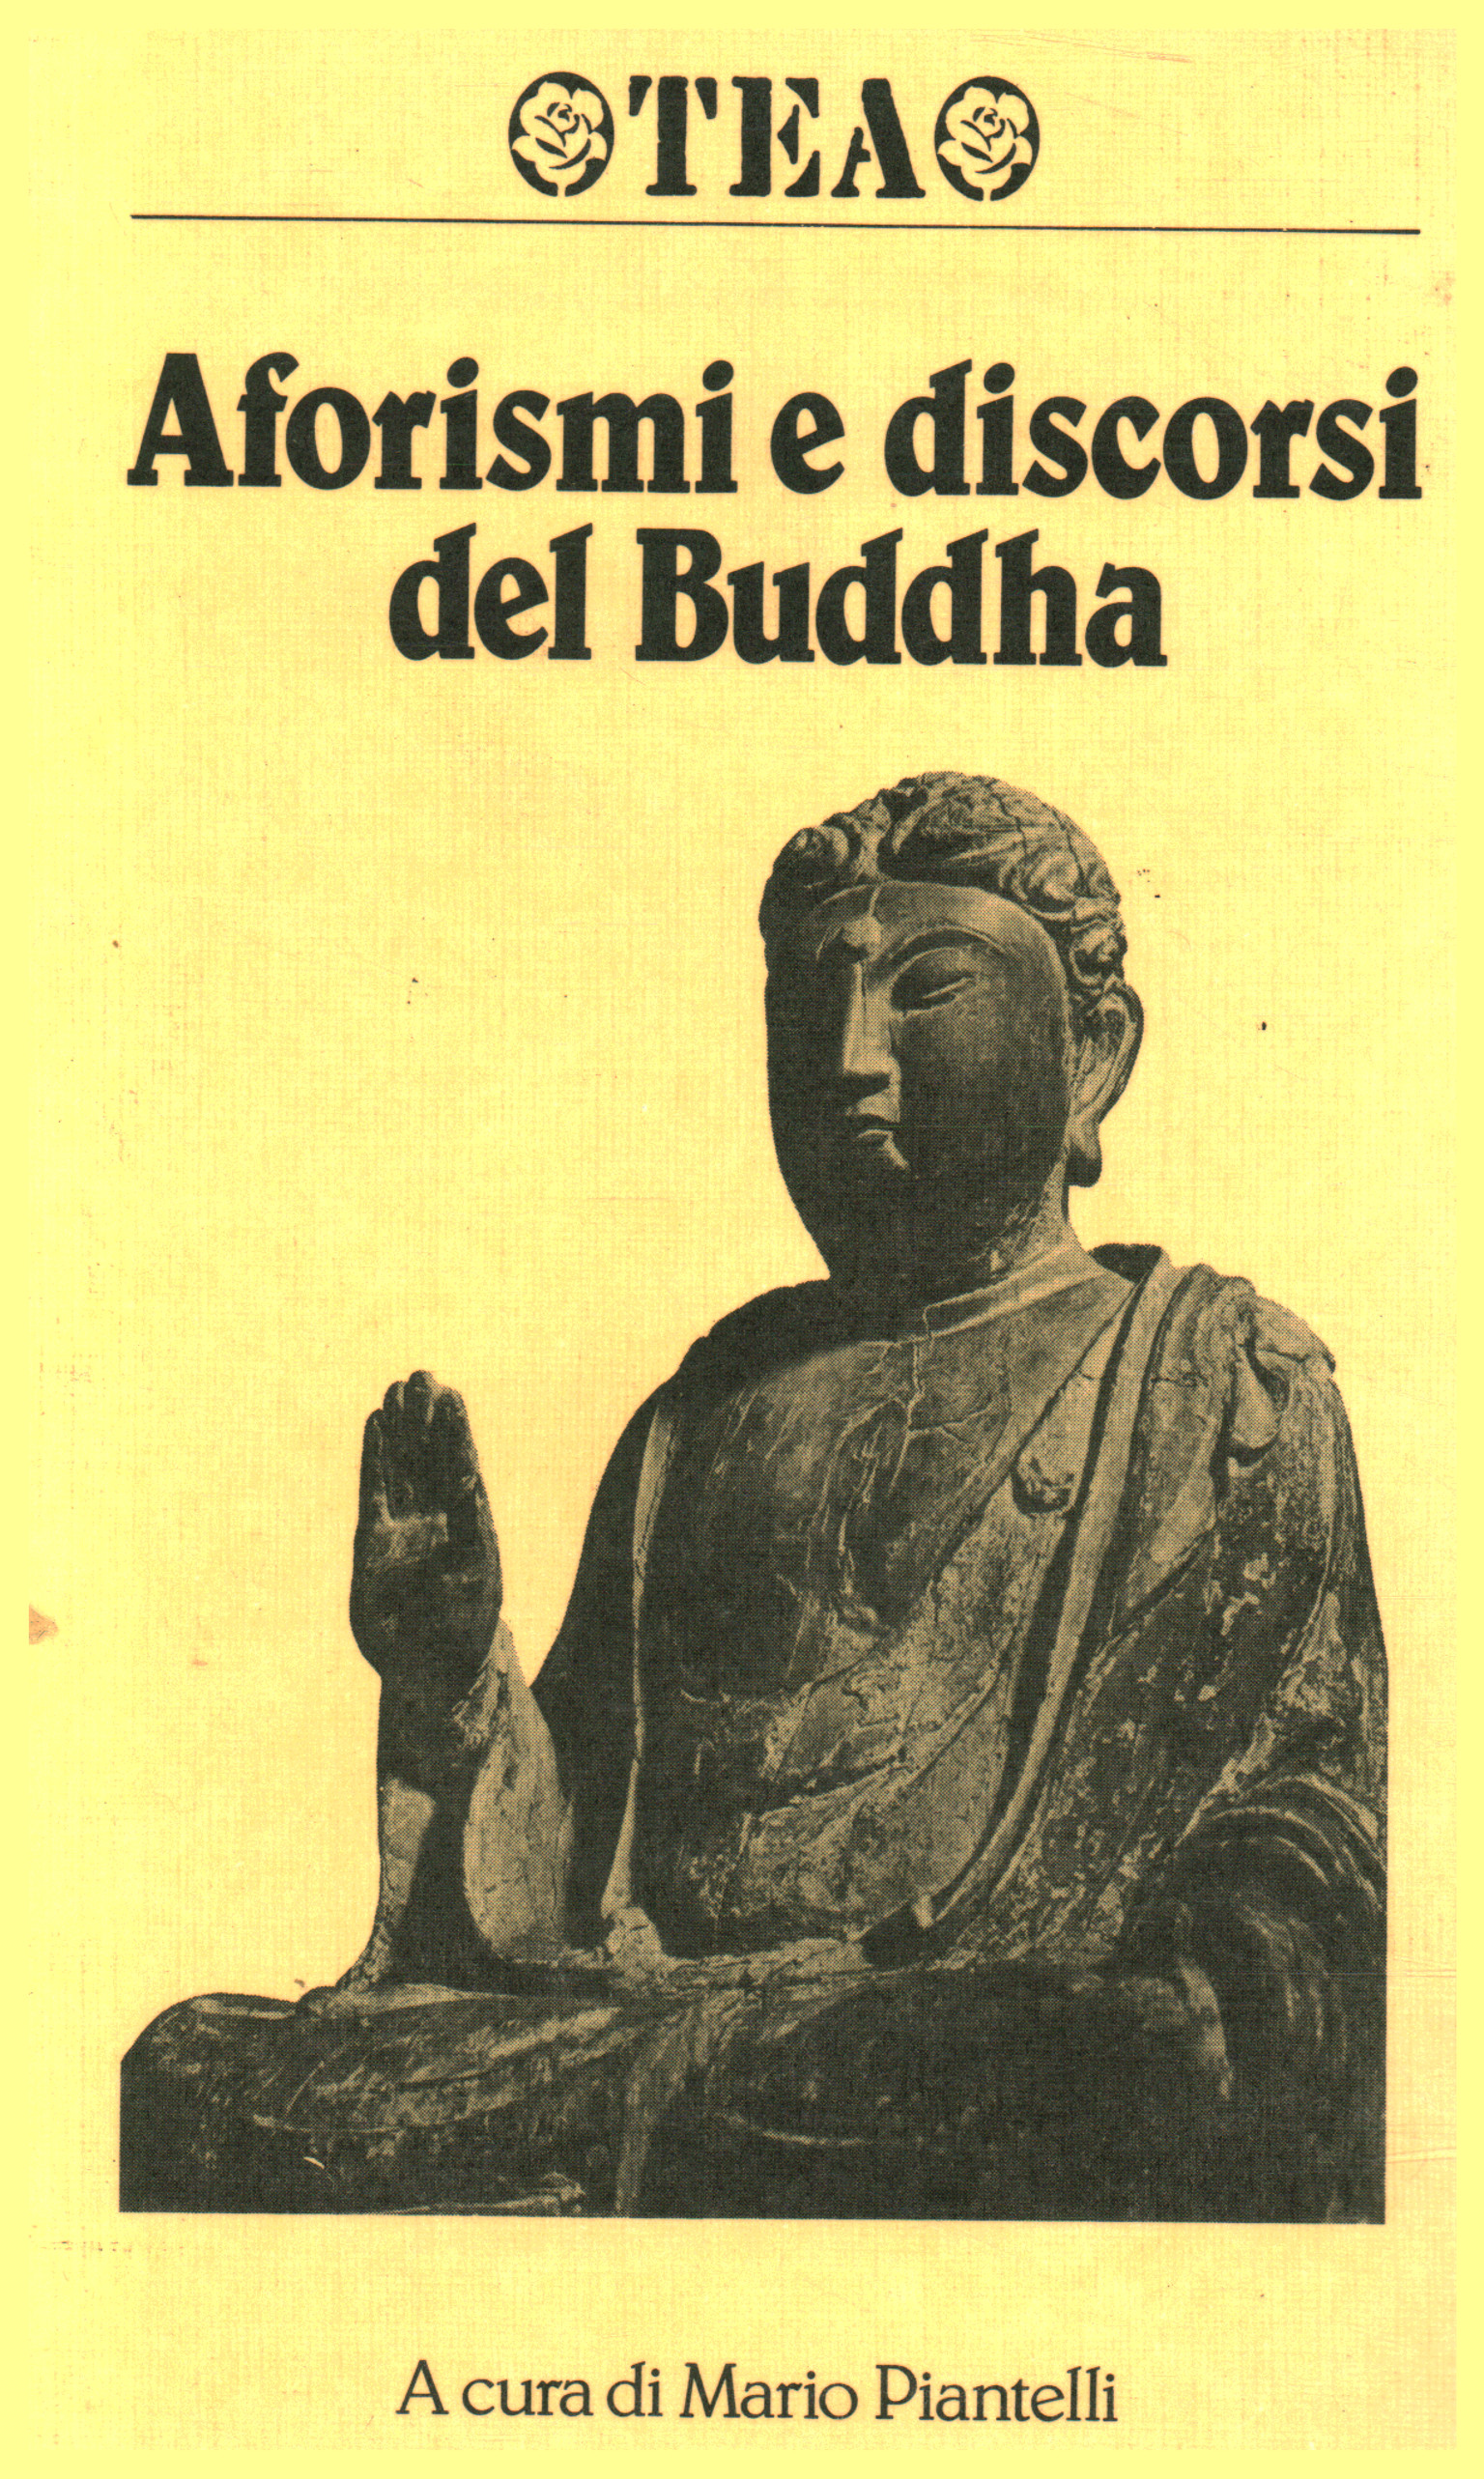 Aphorisms and speeches of the Buddha